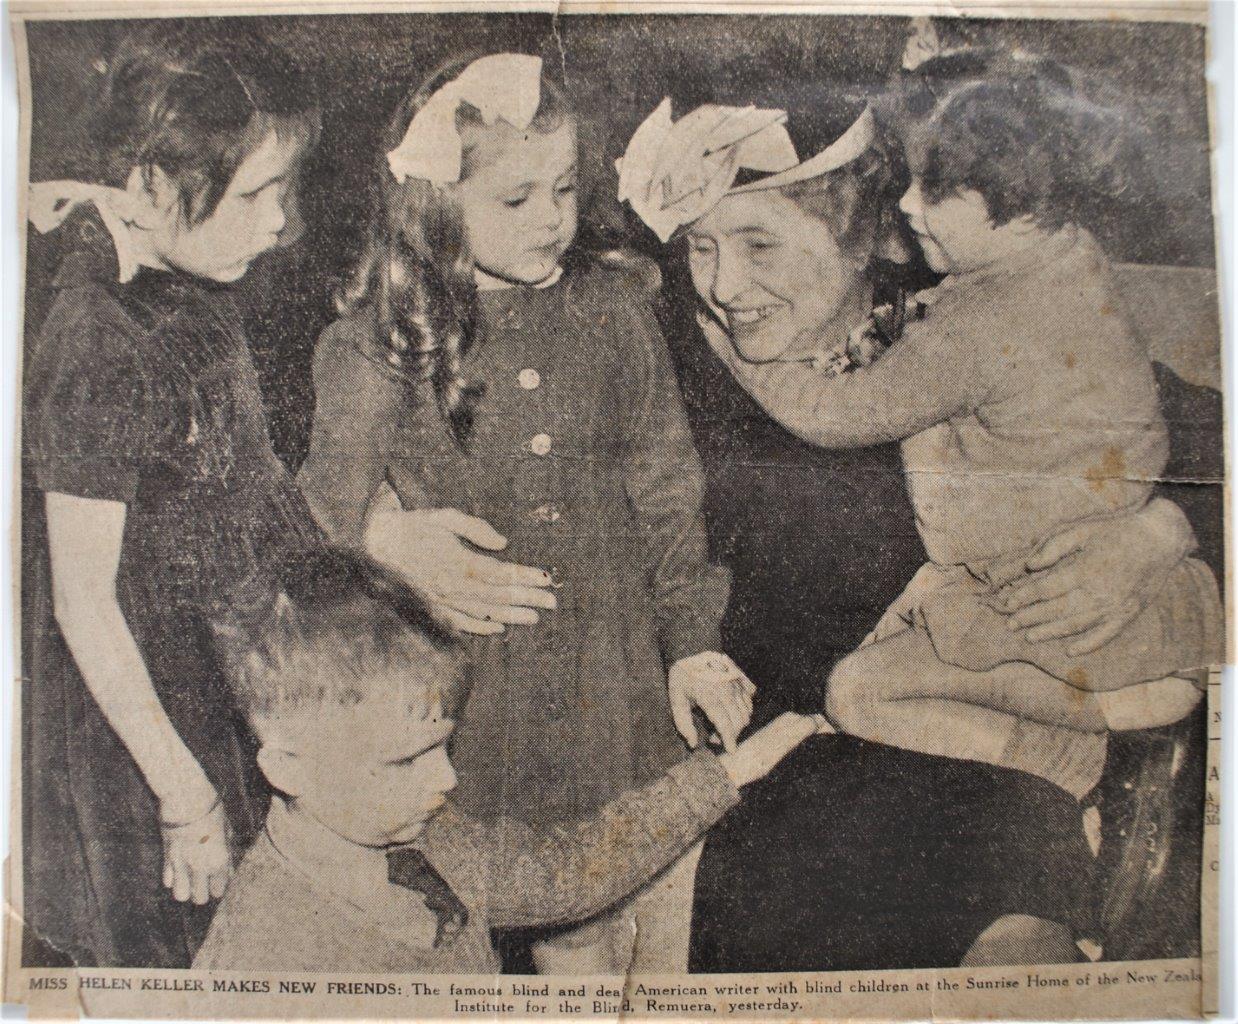 Helen Keller seated and smiling, with four children from the Blind Institute. Lesley is kneeling on Helen's lap with arm around her neck.